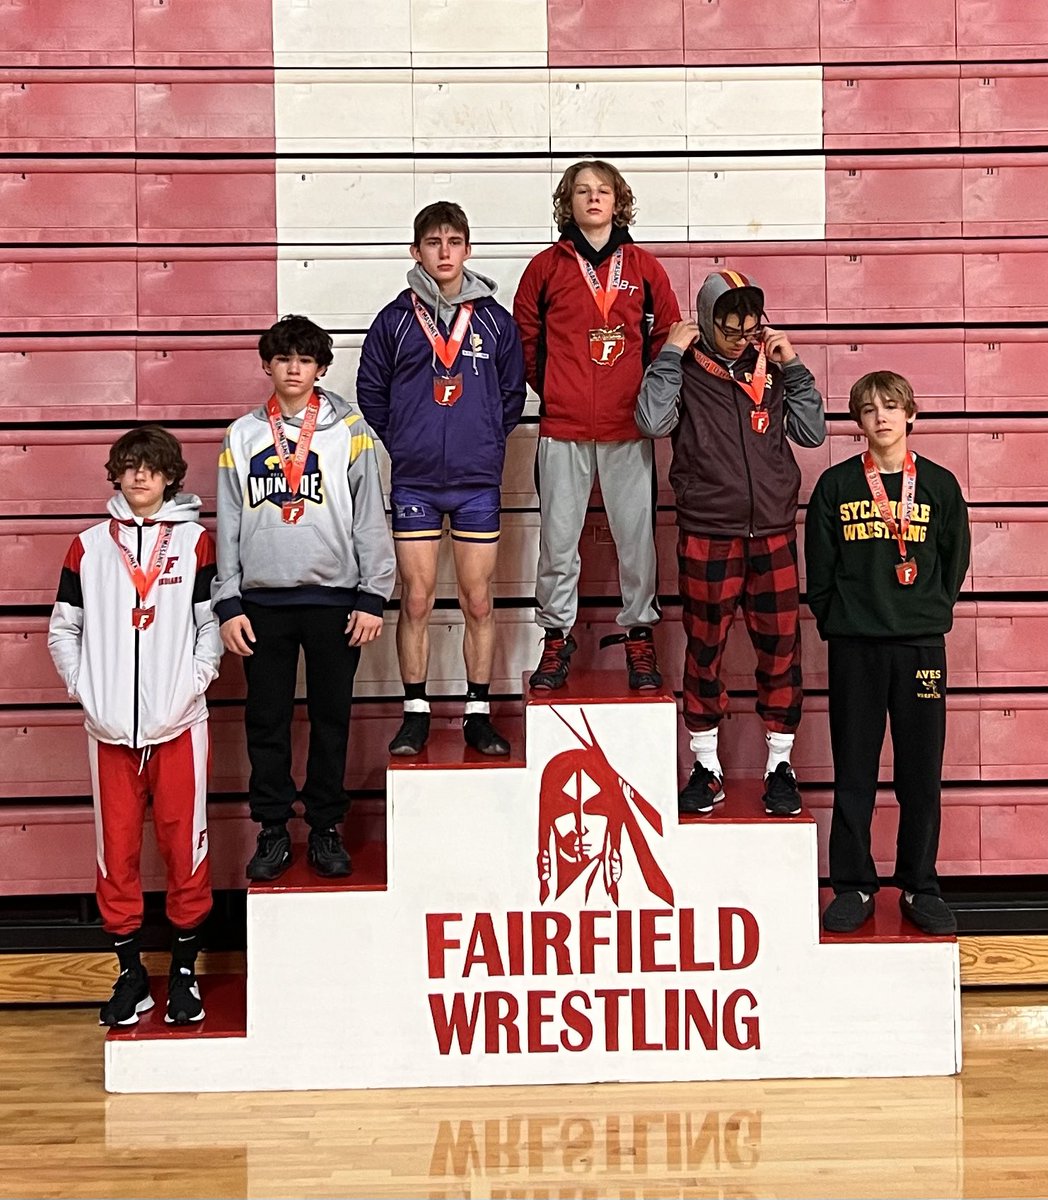 6th place 113lbs - Jake King